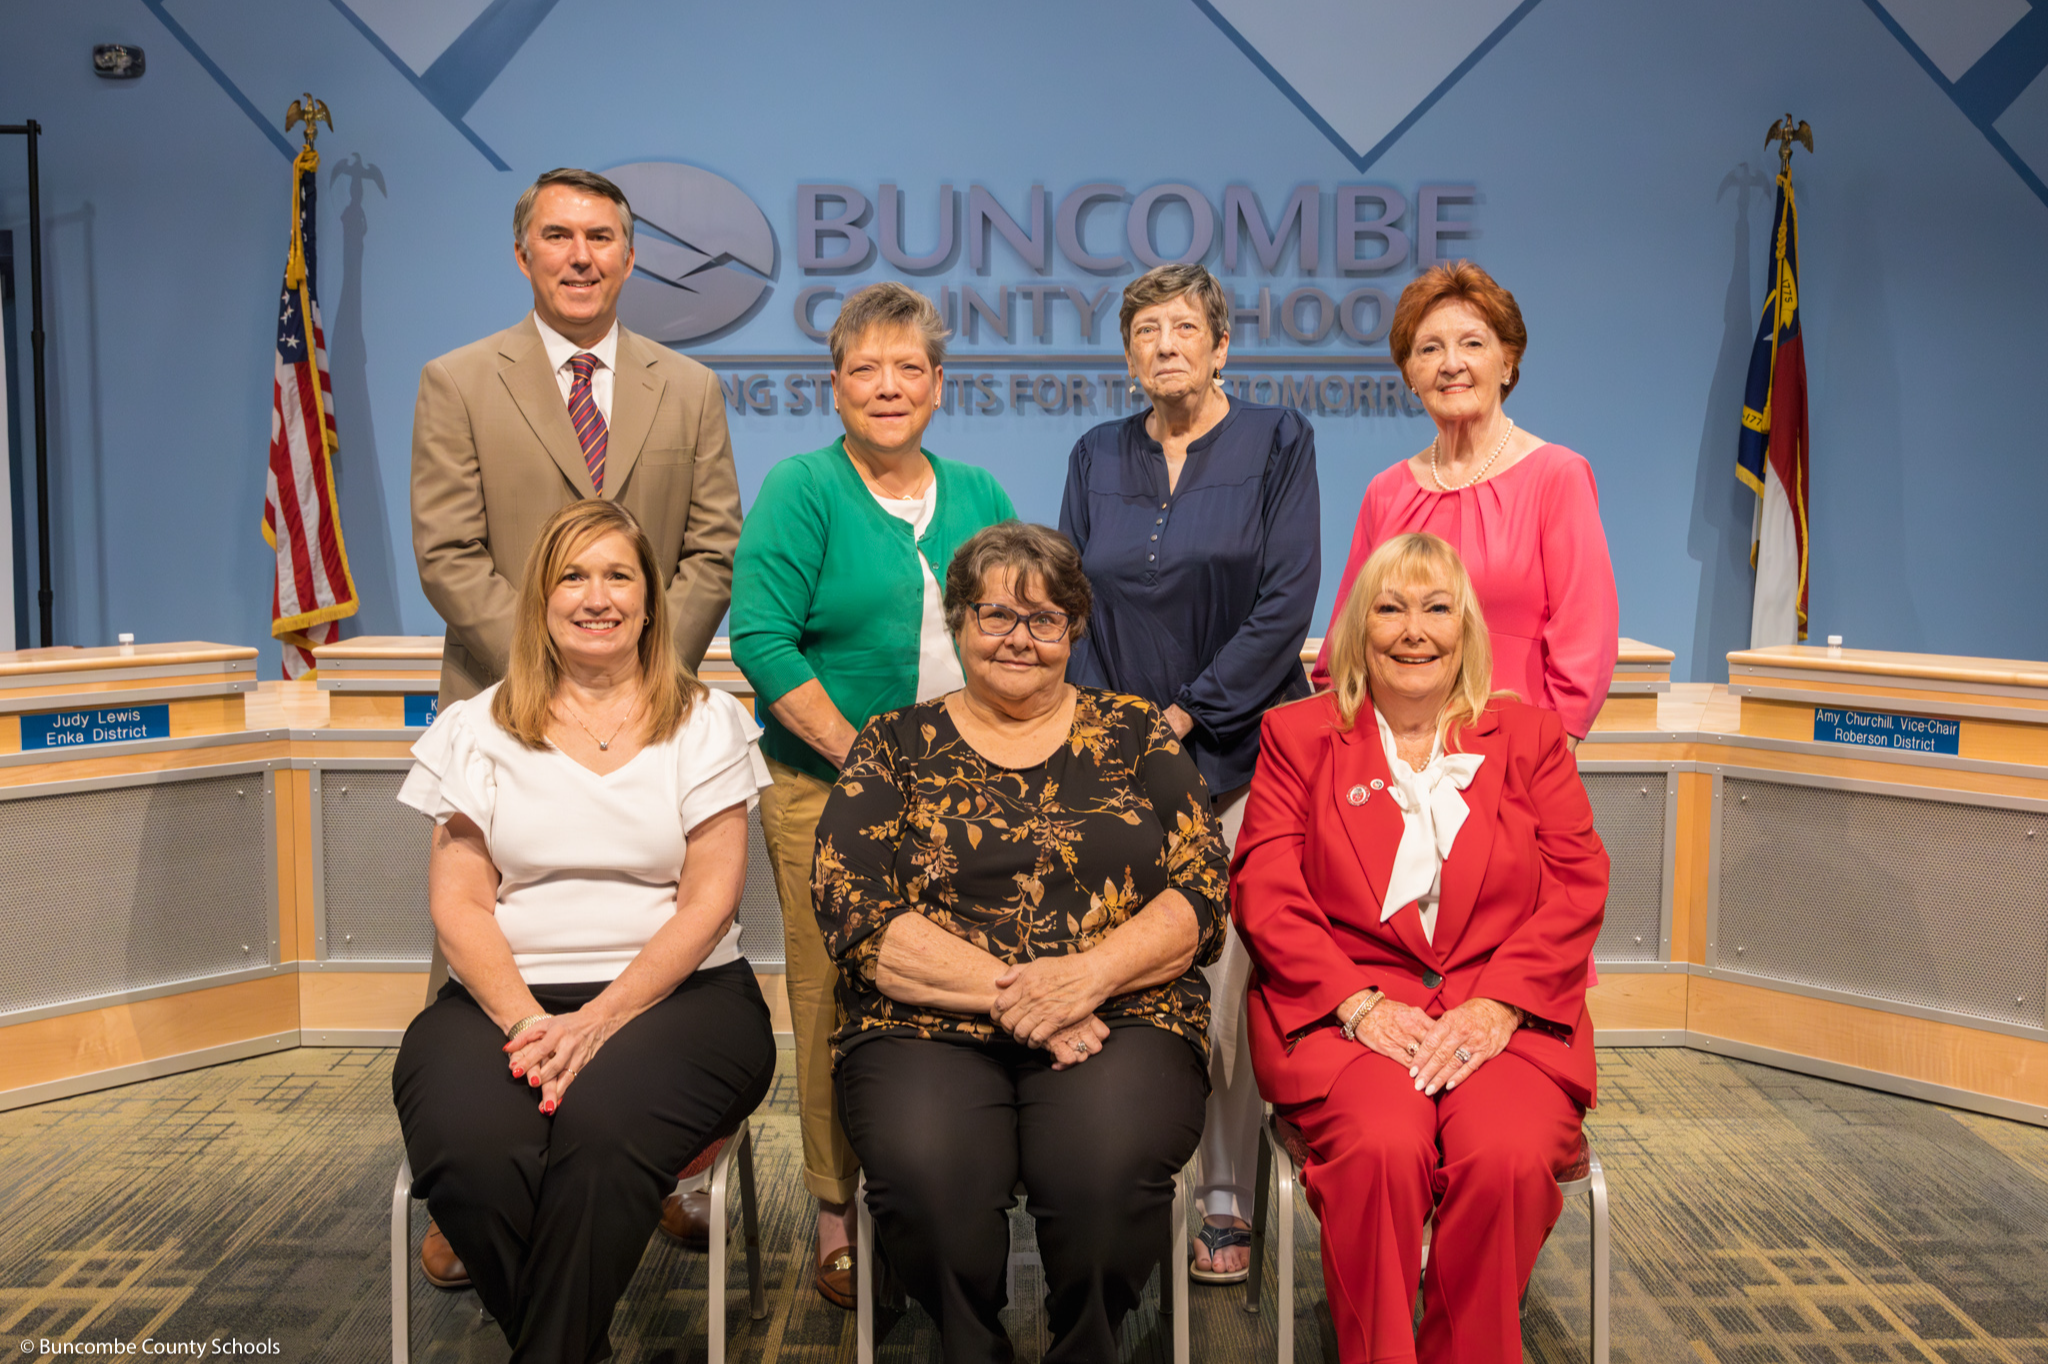 Members of the Buncombe County Board of Education. Seated, L-R, Ms. Amy Churchill, Madam Chair Ann Franklin, Ms. Kim Plemmons. L-R standing: Mr. Rob Elliot, Dr. Glenda Weinert, Ms. Peggy Buchanan, Ms. Judy Lewis